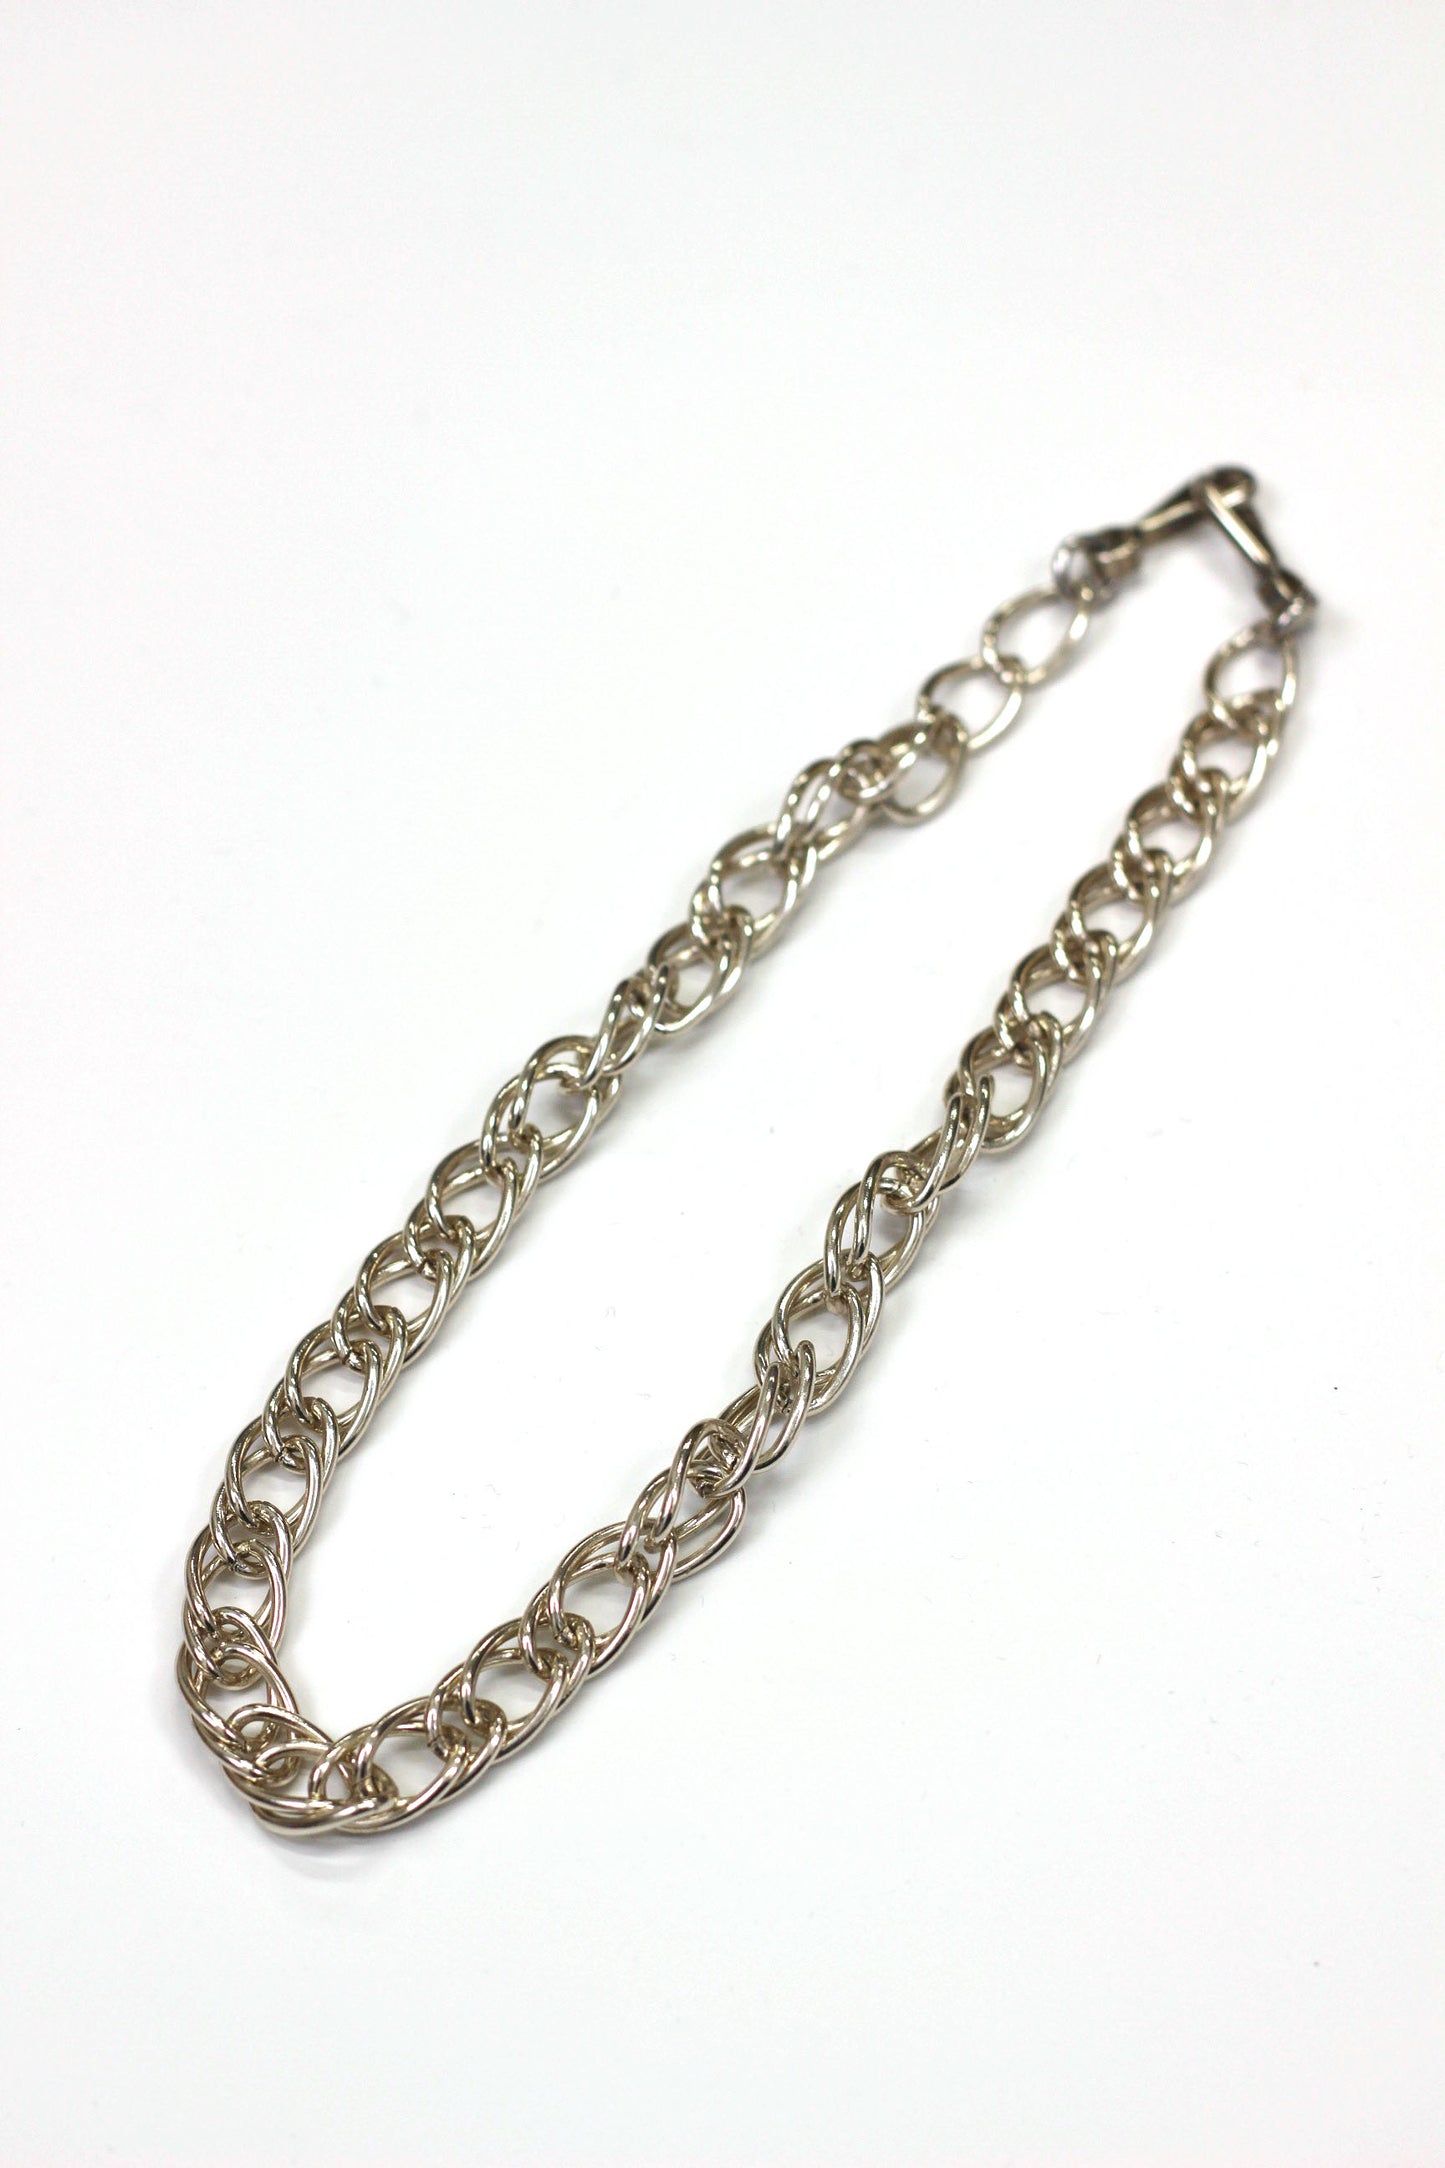 Vintage silver chain necklace 気高い輝き